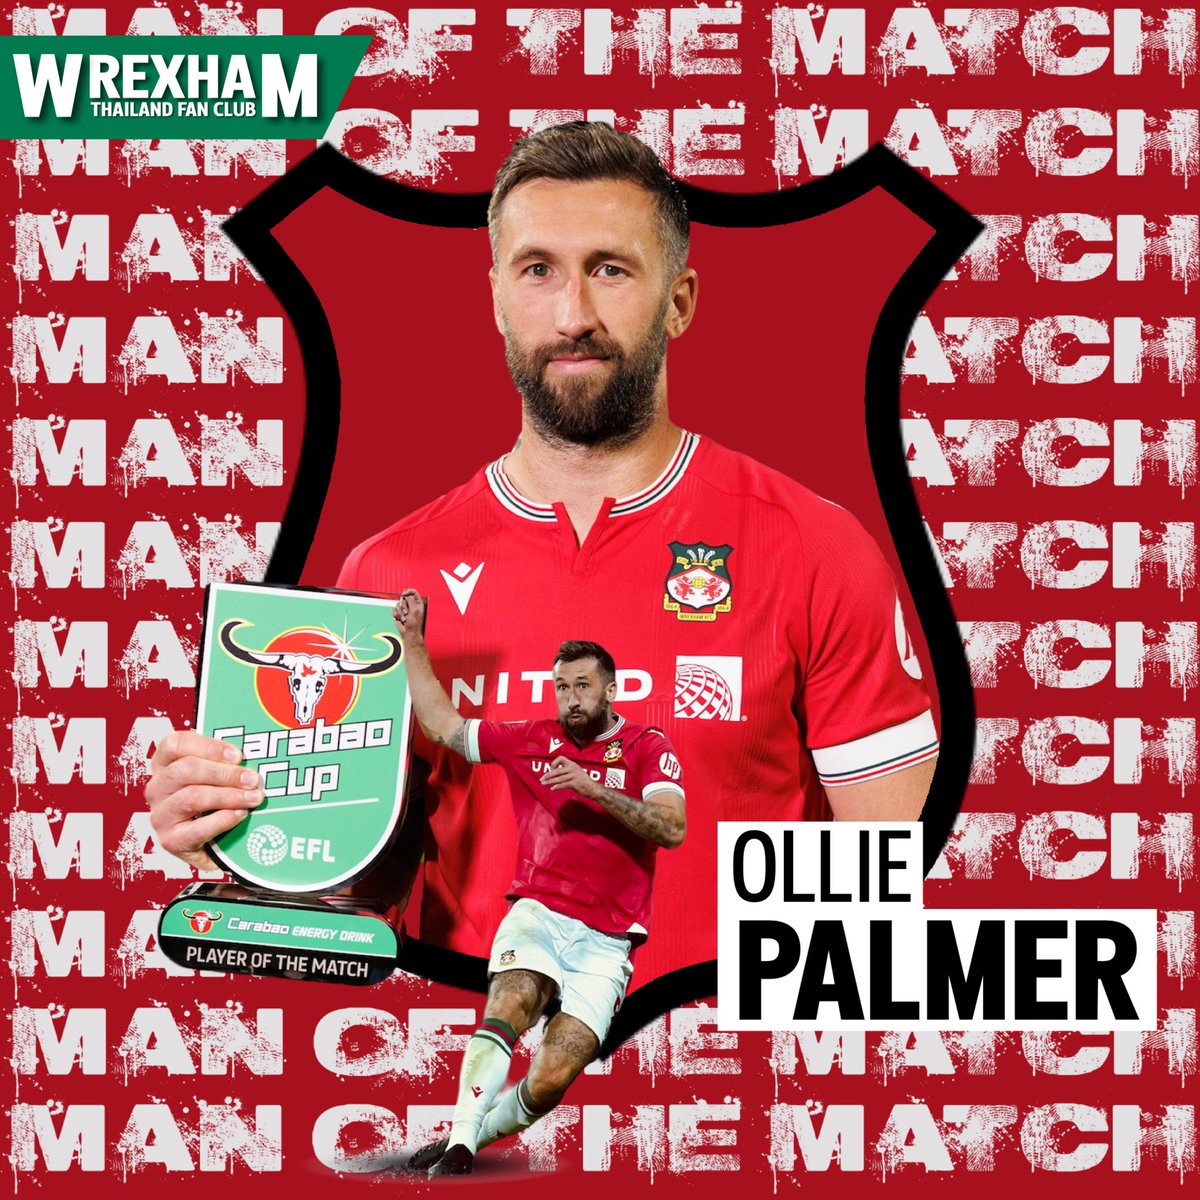 73 minutes played
5 shot attempts
1 shot on target
22 touches
13 accurate Passes (59.1%)
1 accurate long ball (100%)
2 tackles
1 interception
1 blocked shot

Great performance @_olliepalmer 

Source @aiscoreofficial 
#WxmAFC